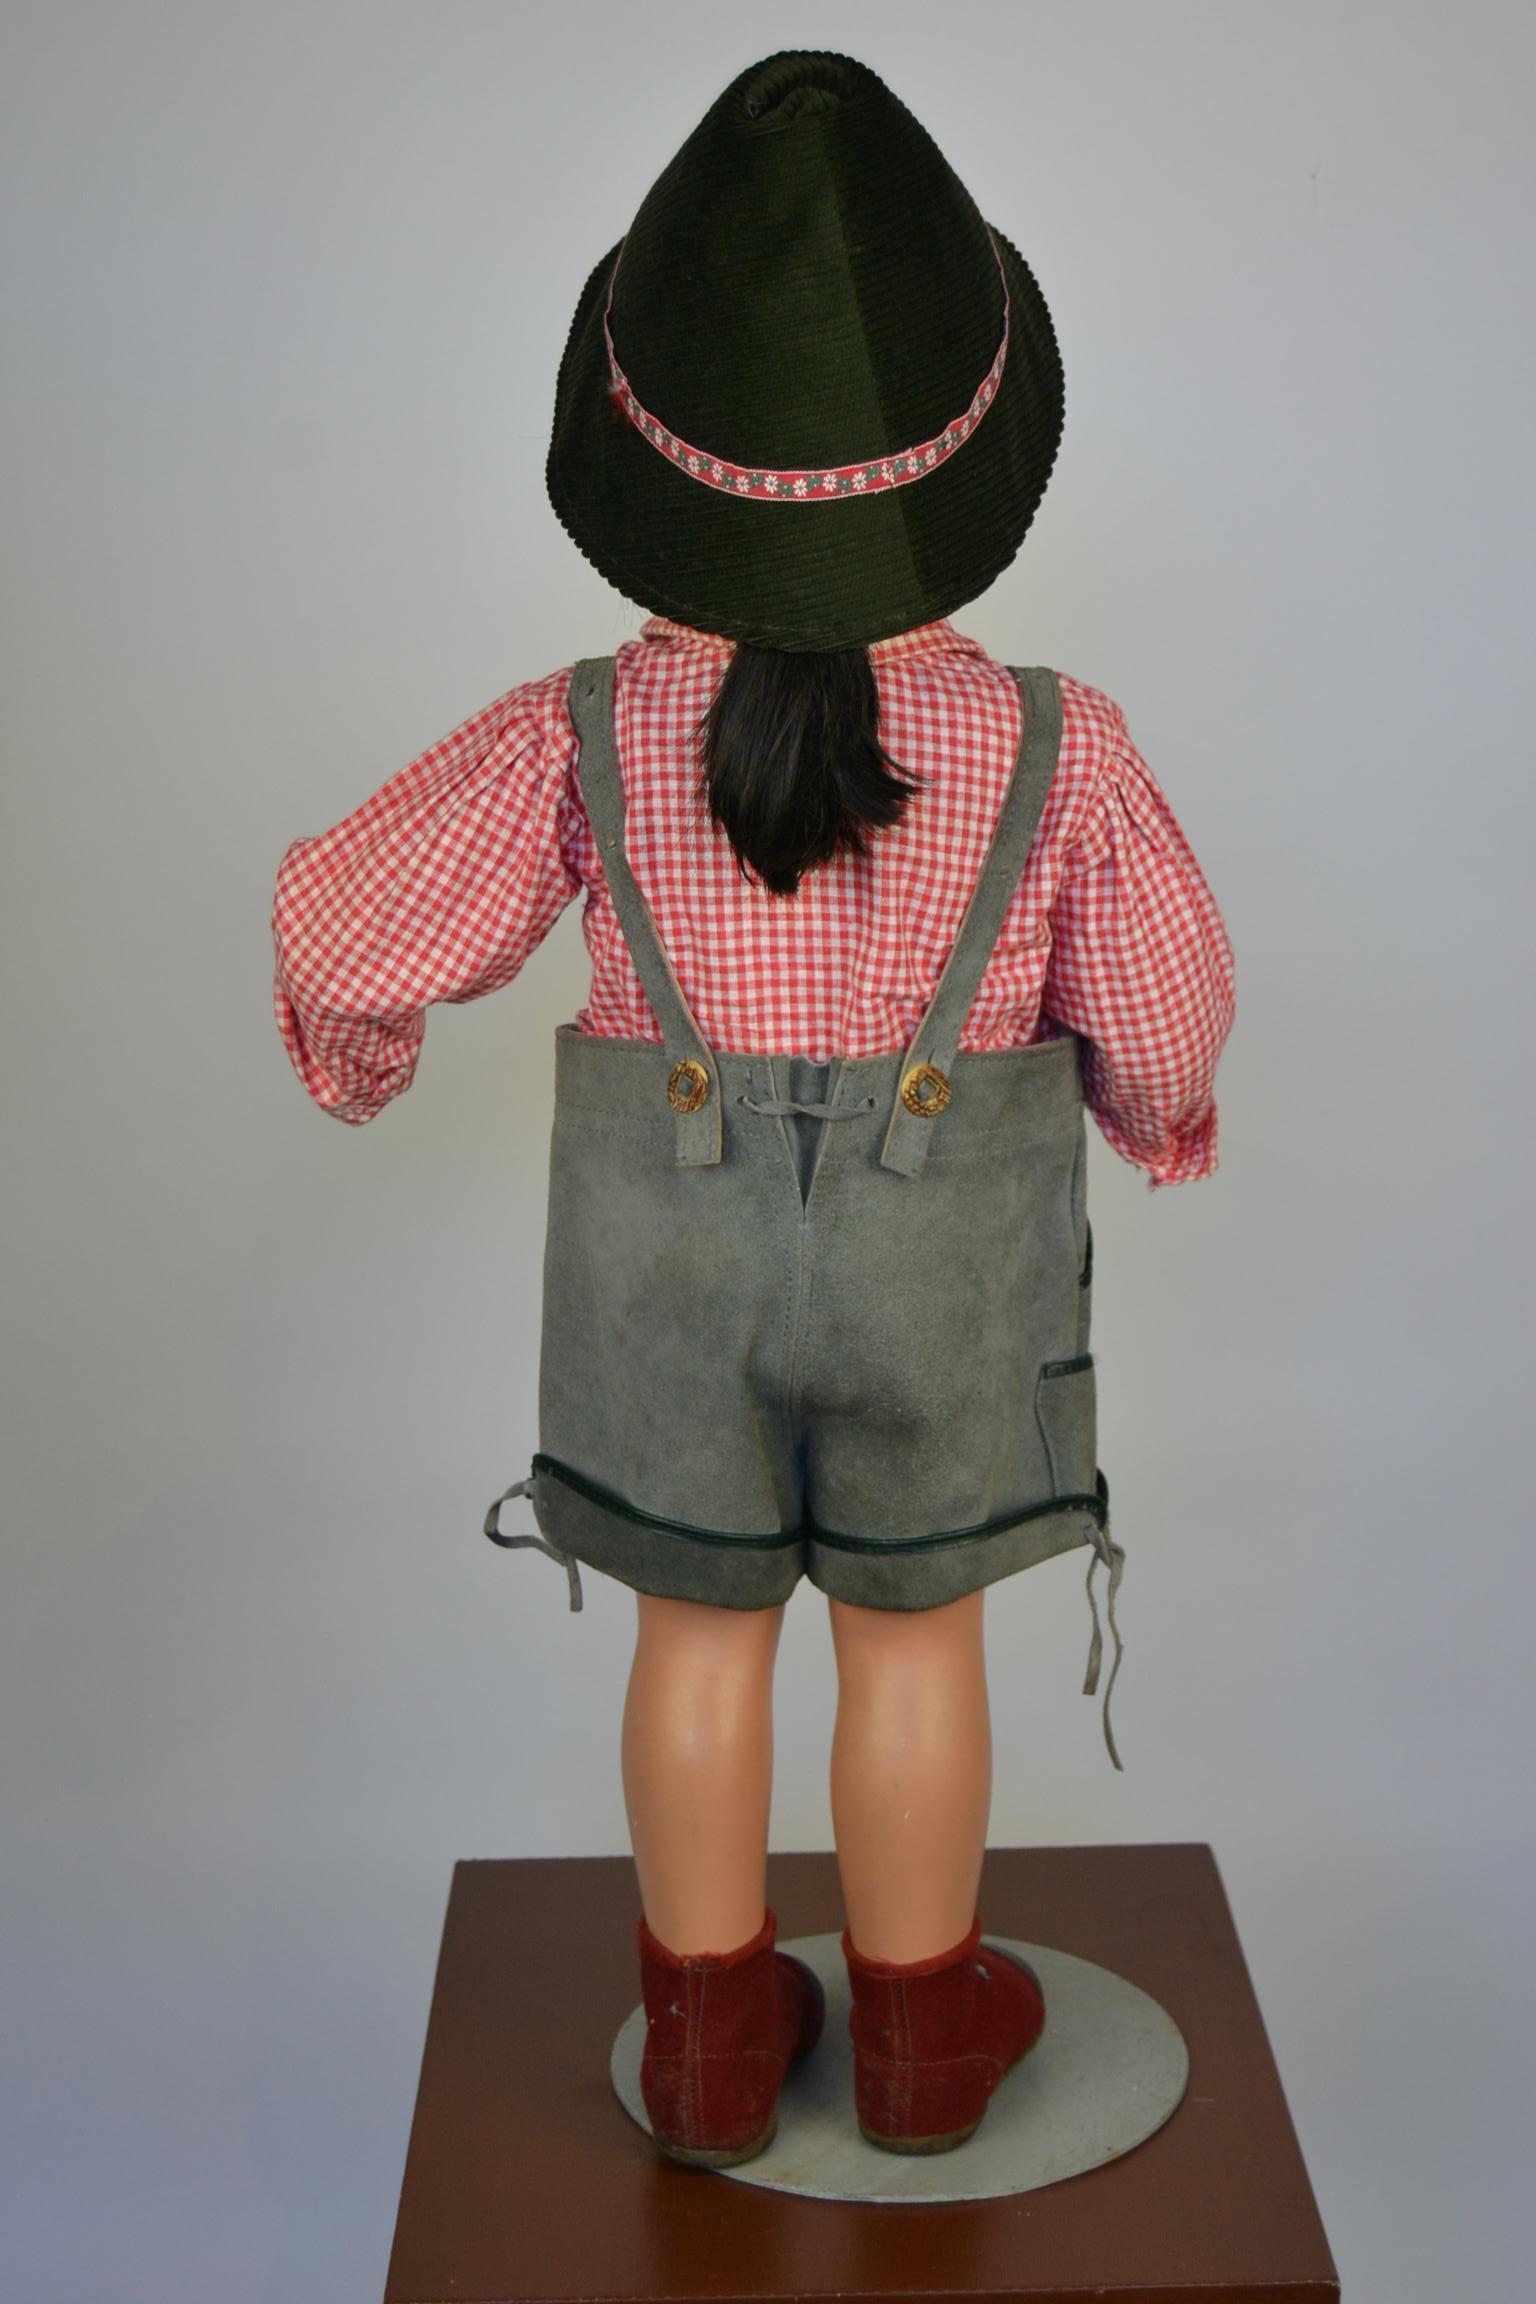 1950s Store Display Mannequin Child, Tyrol Clothing, Kathe Kruse Style 1